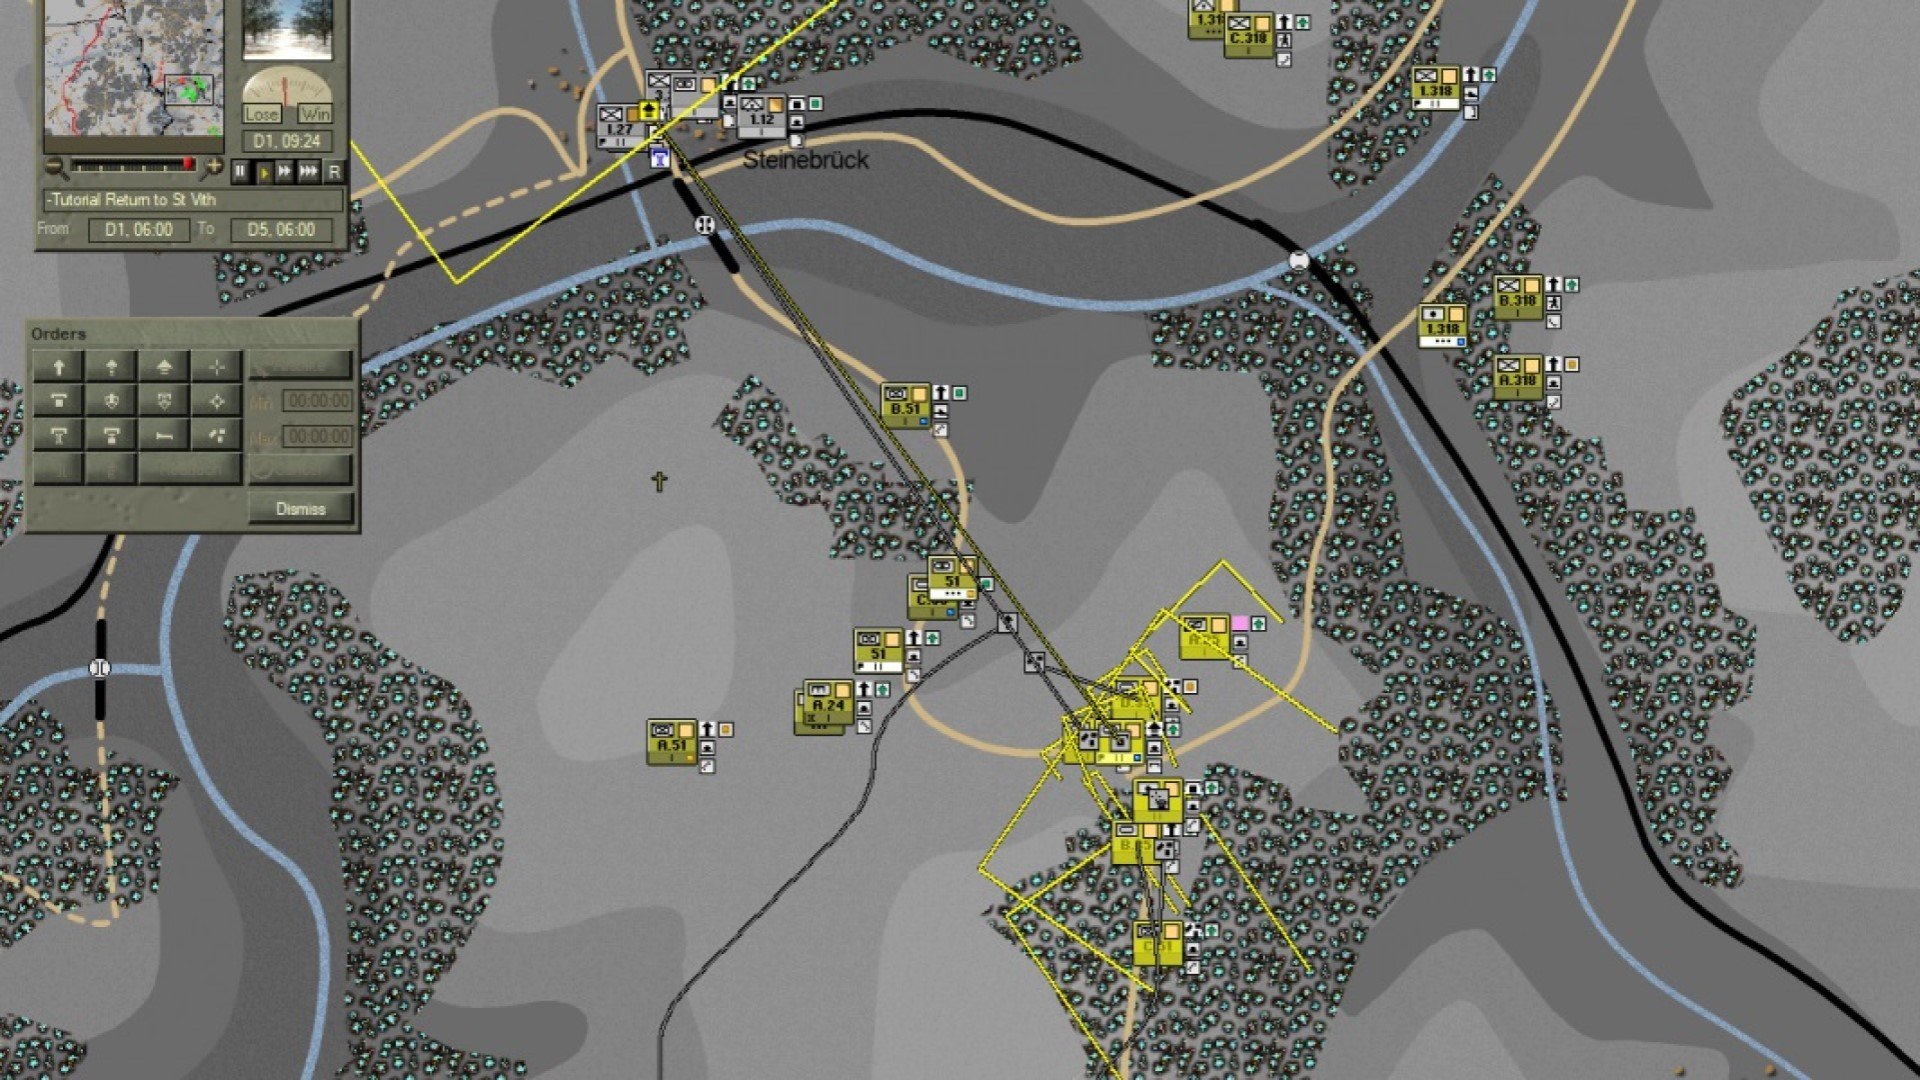 Best WW2 games - screenshot from Command Ops 2 showing an aerial operational map with various unit symbols indicating movements